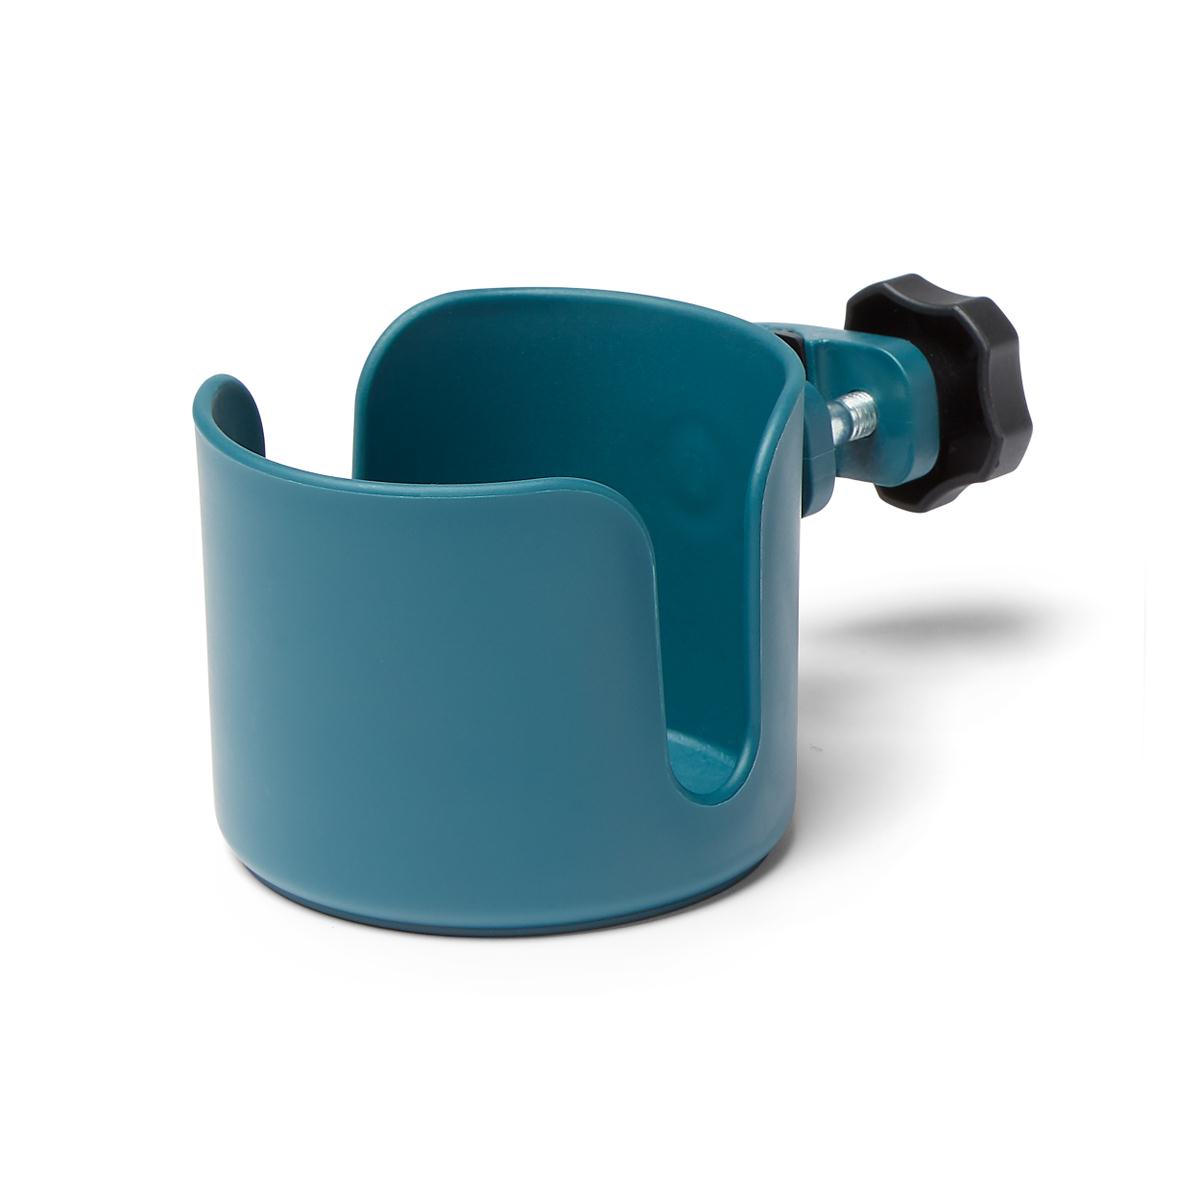 Medline Universal Clamp-On Cup Holders - Senior.com Cup Holders